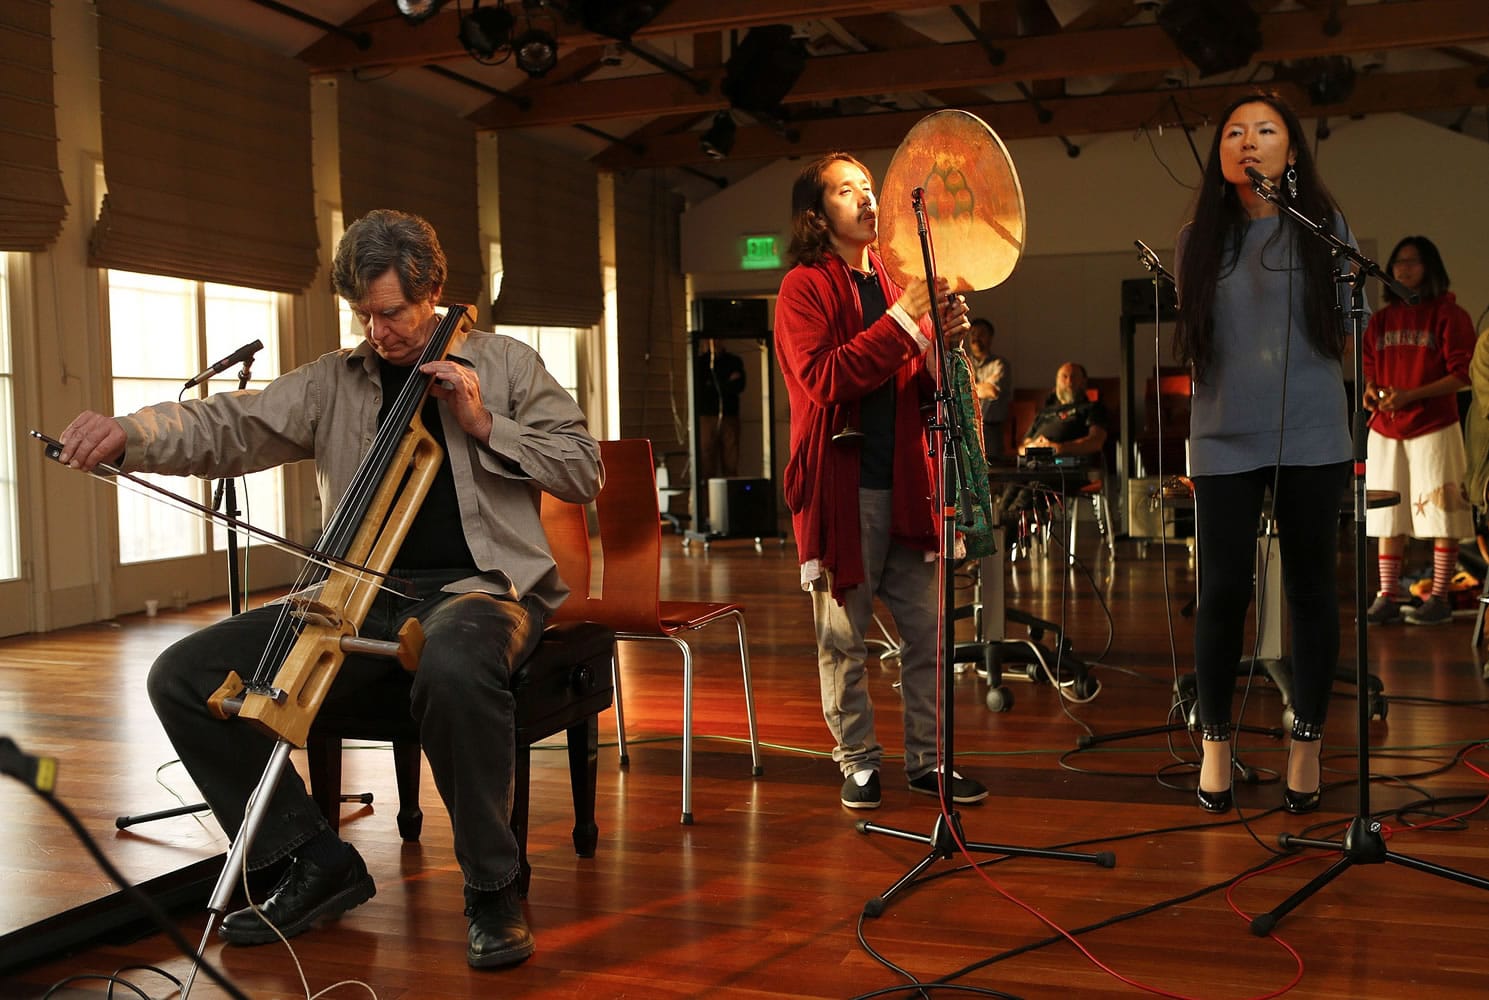 Chris Chafe, left, director of the Center for Computer Research in Music and Acoustics at Stanford University, plays his handmade electric cello with singers Reshi Tsering Tan, center, and Cecilia Wu, right, along with musicians in Virginia Tech and Santa Barbara via the Internet in Stanford, Calif.